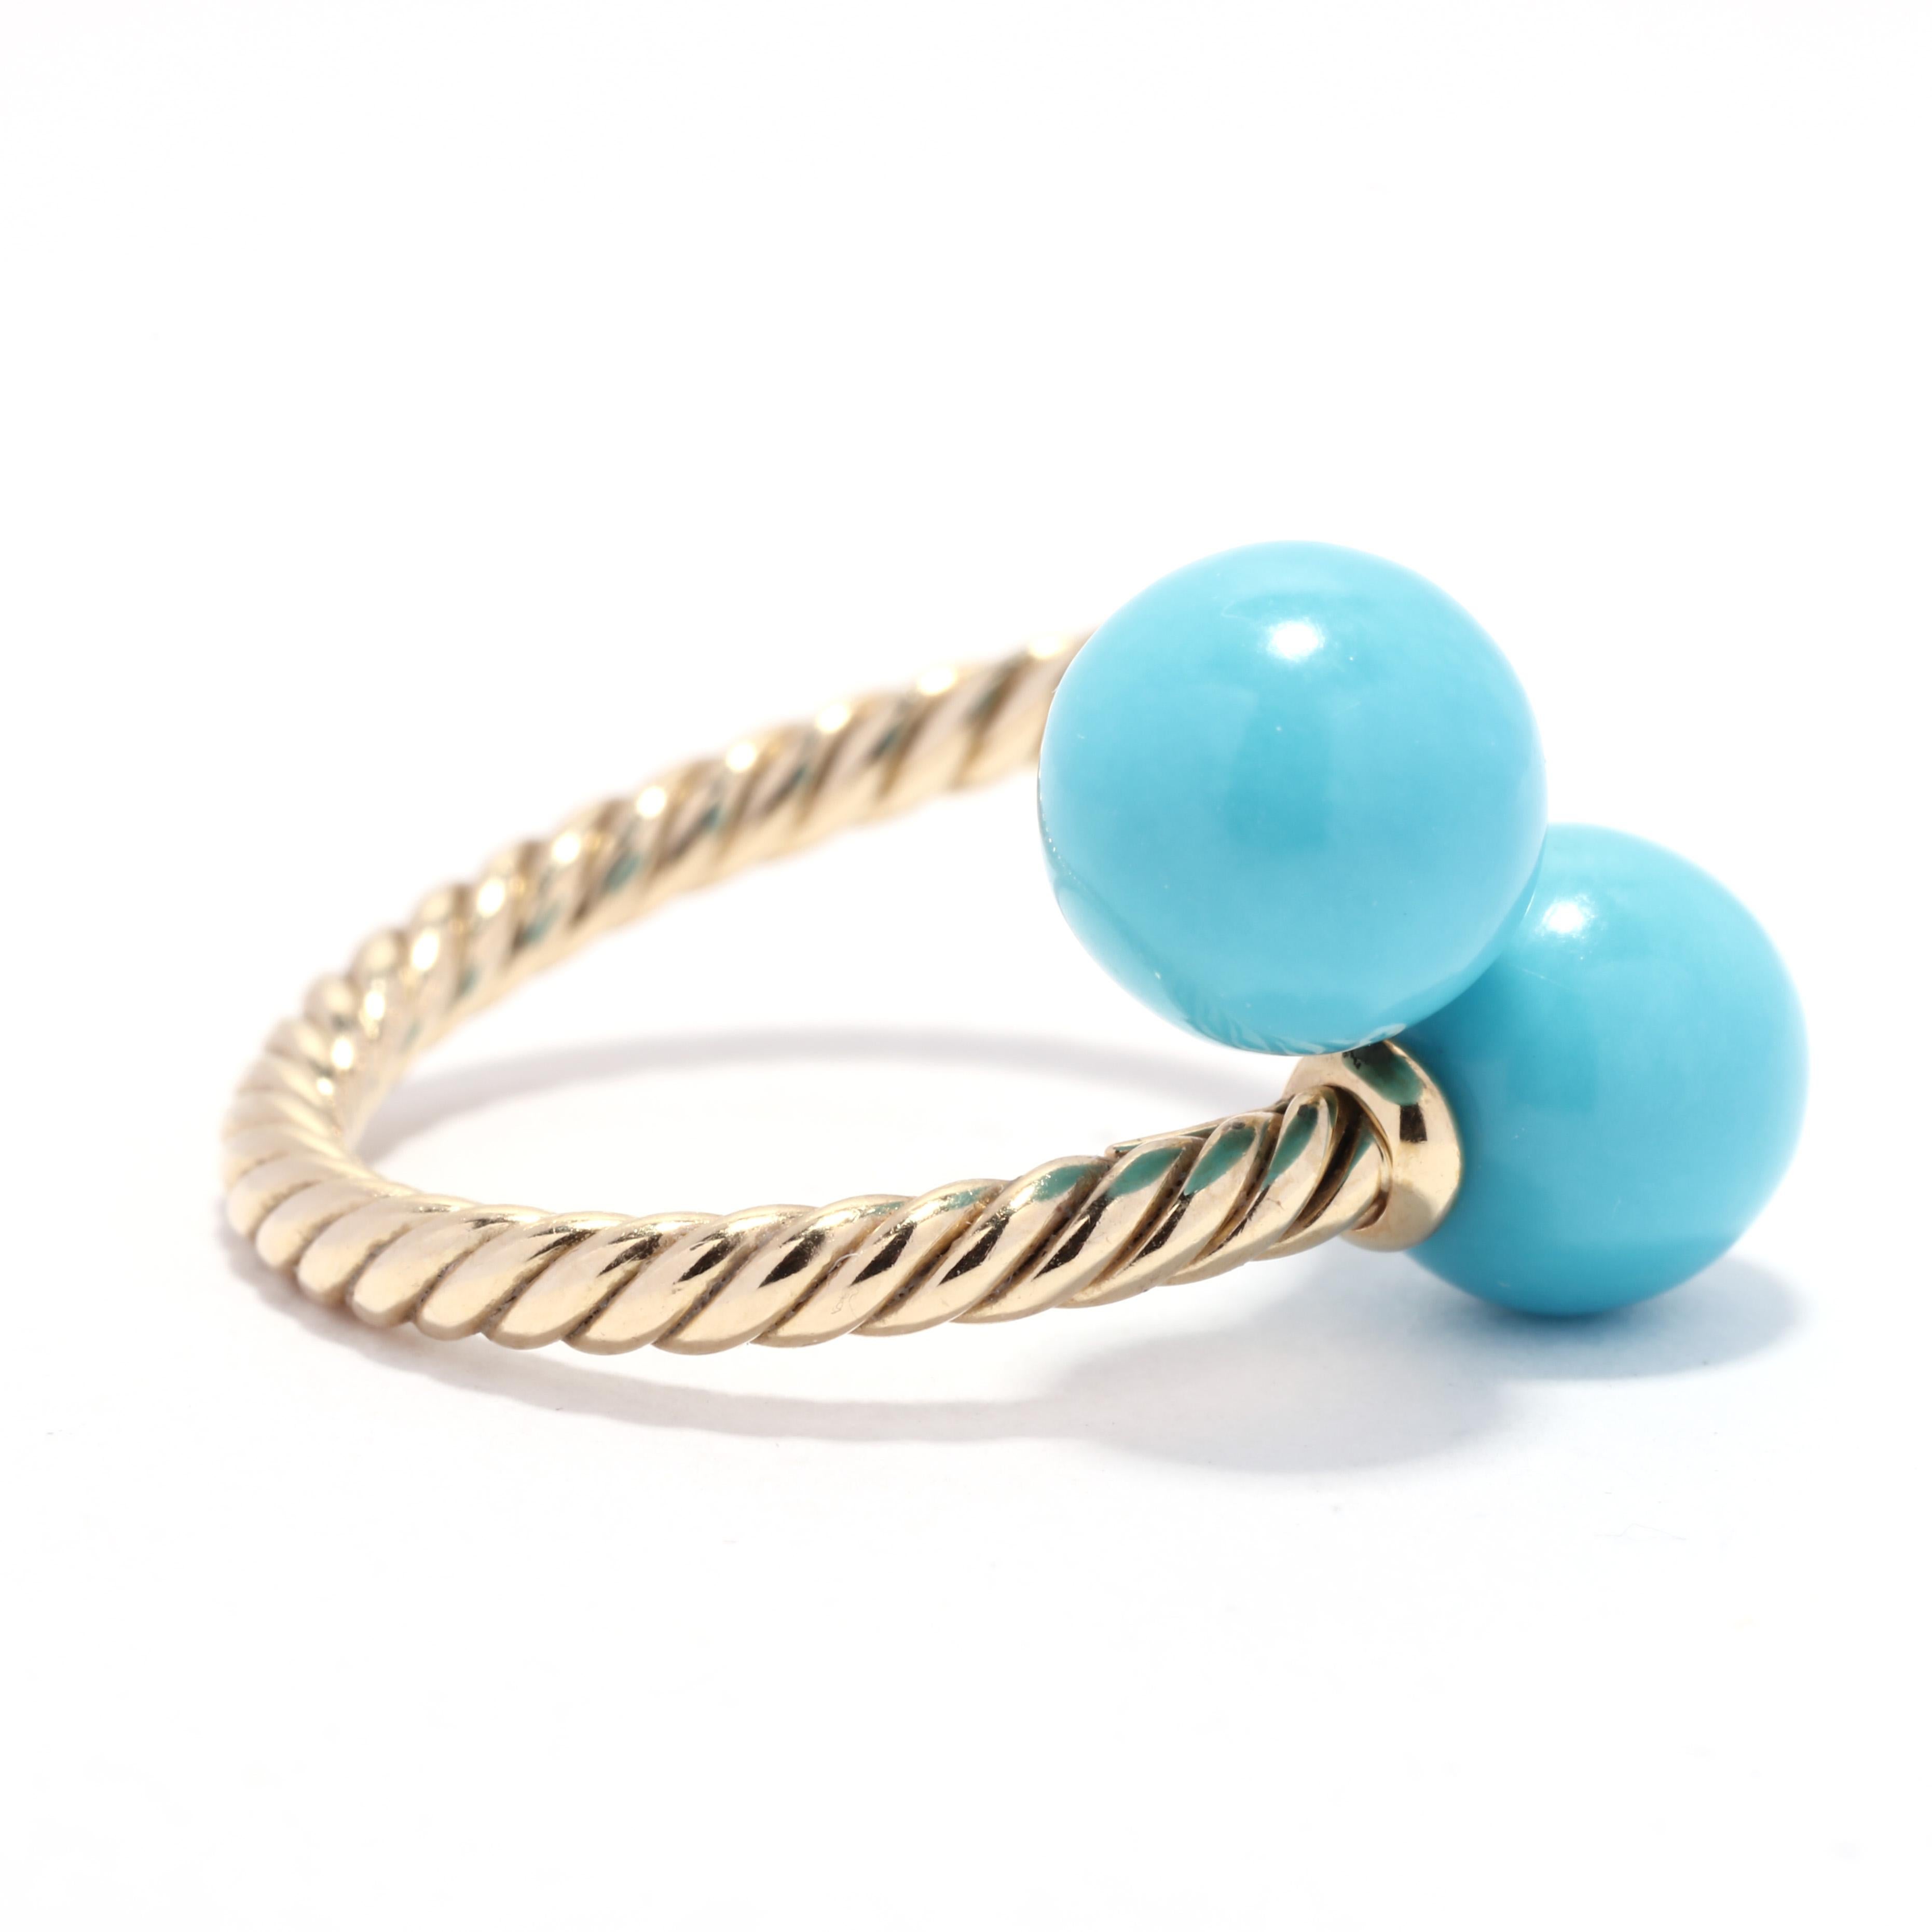 A David Yurman Solari 18 karat yellow gold turquoise bypass ring. This blue turquoise cocktail ring features a bypass design with a cable motif band and two turquoise beads at each end.

Stones:
- turquoise, 2 stones
- round bead
- 8.5 mm

Ring Size